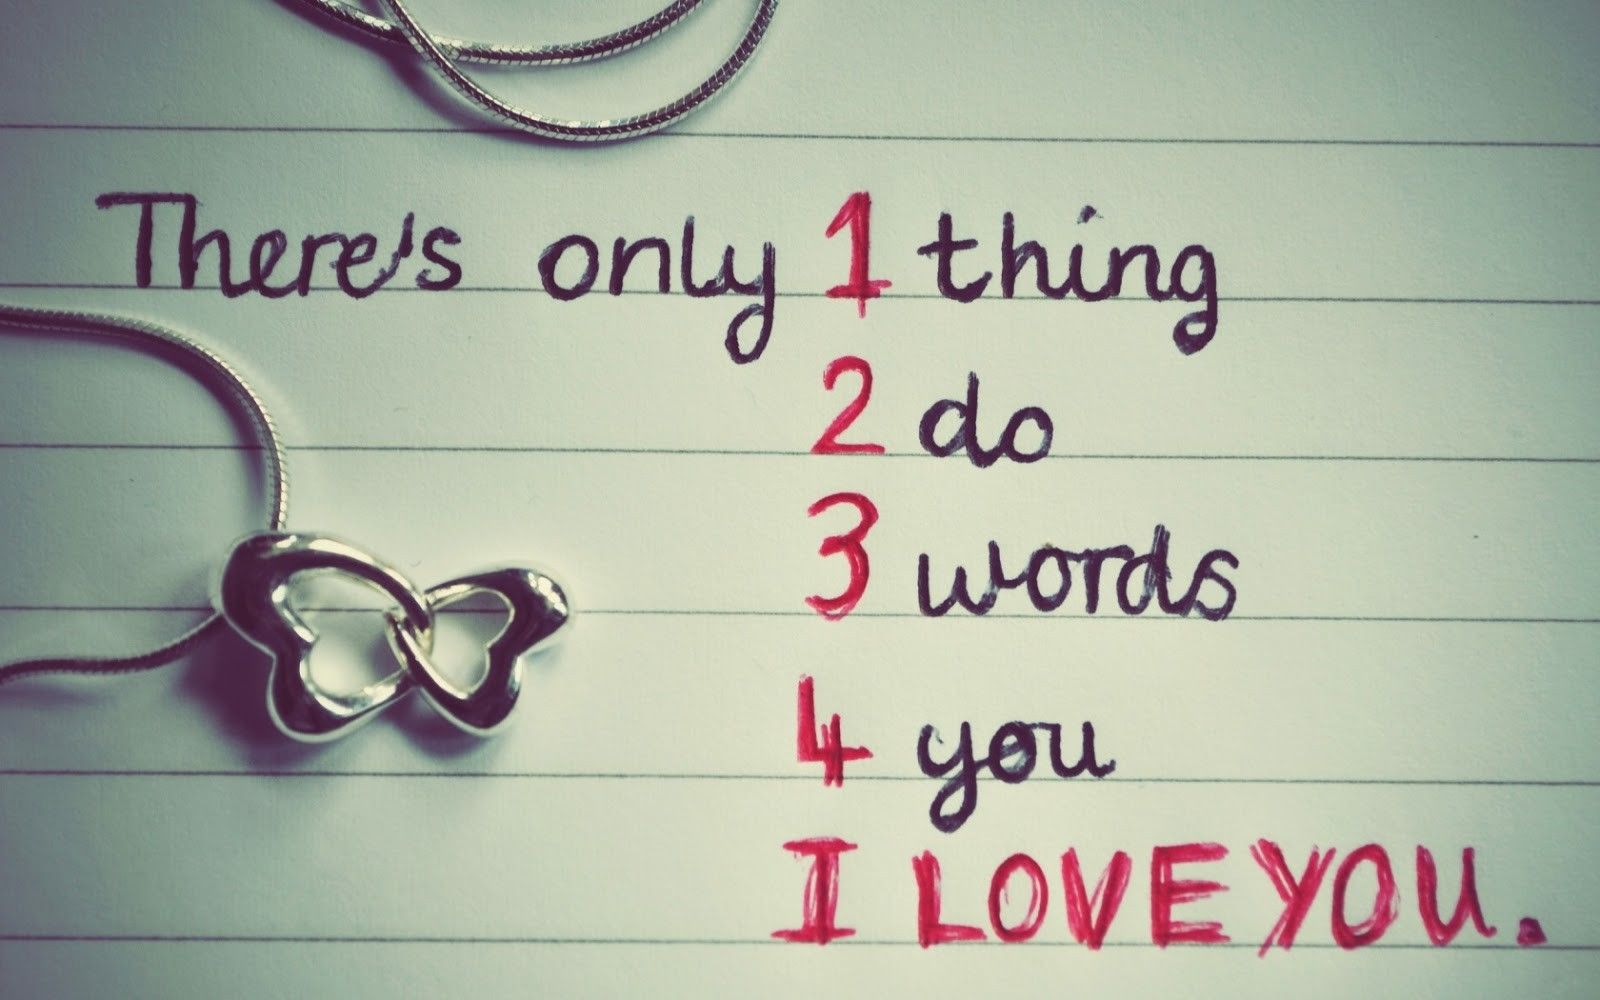 I love you quotes hd wallpapers - Wallpaperss HD